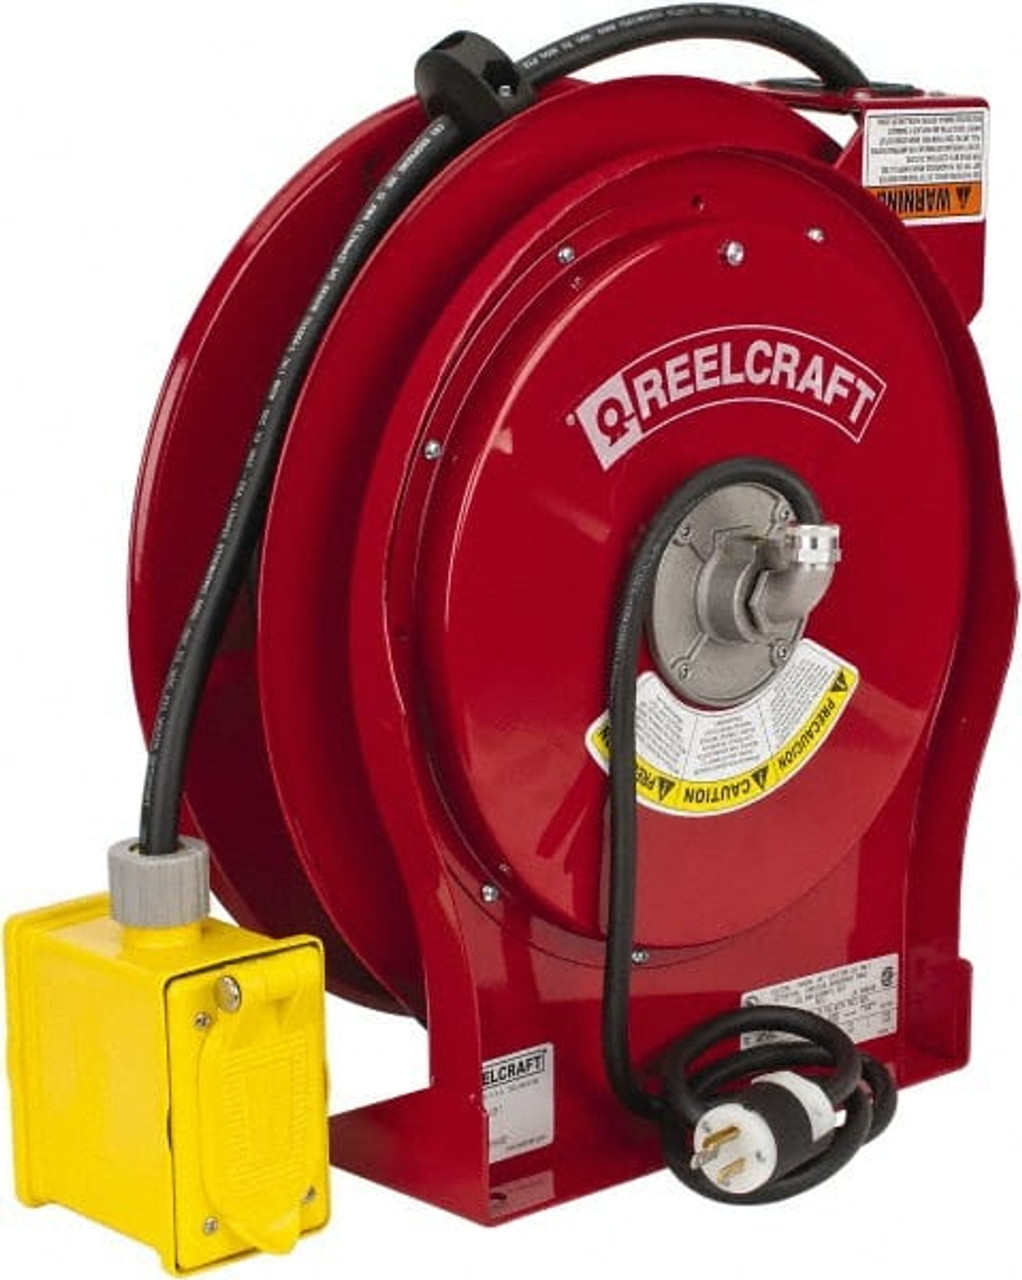 Reelcraft 12 AWG, 50 ft. Cable Length, Cord & Cable Reel with Duplex GFCI  Outlet Box End 2 Outlets, NEMA 5-15R, 15 Amps, 125 Volts, SEOOW Cable, Red  Reel L 5550 123 7 - 02756278 - Penn Tool Co., Inc